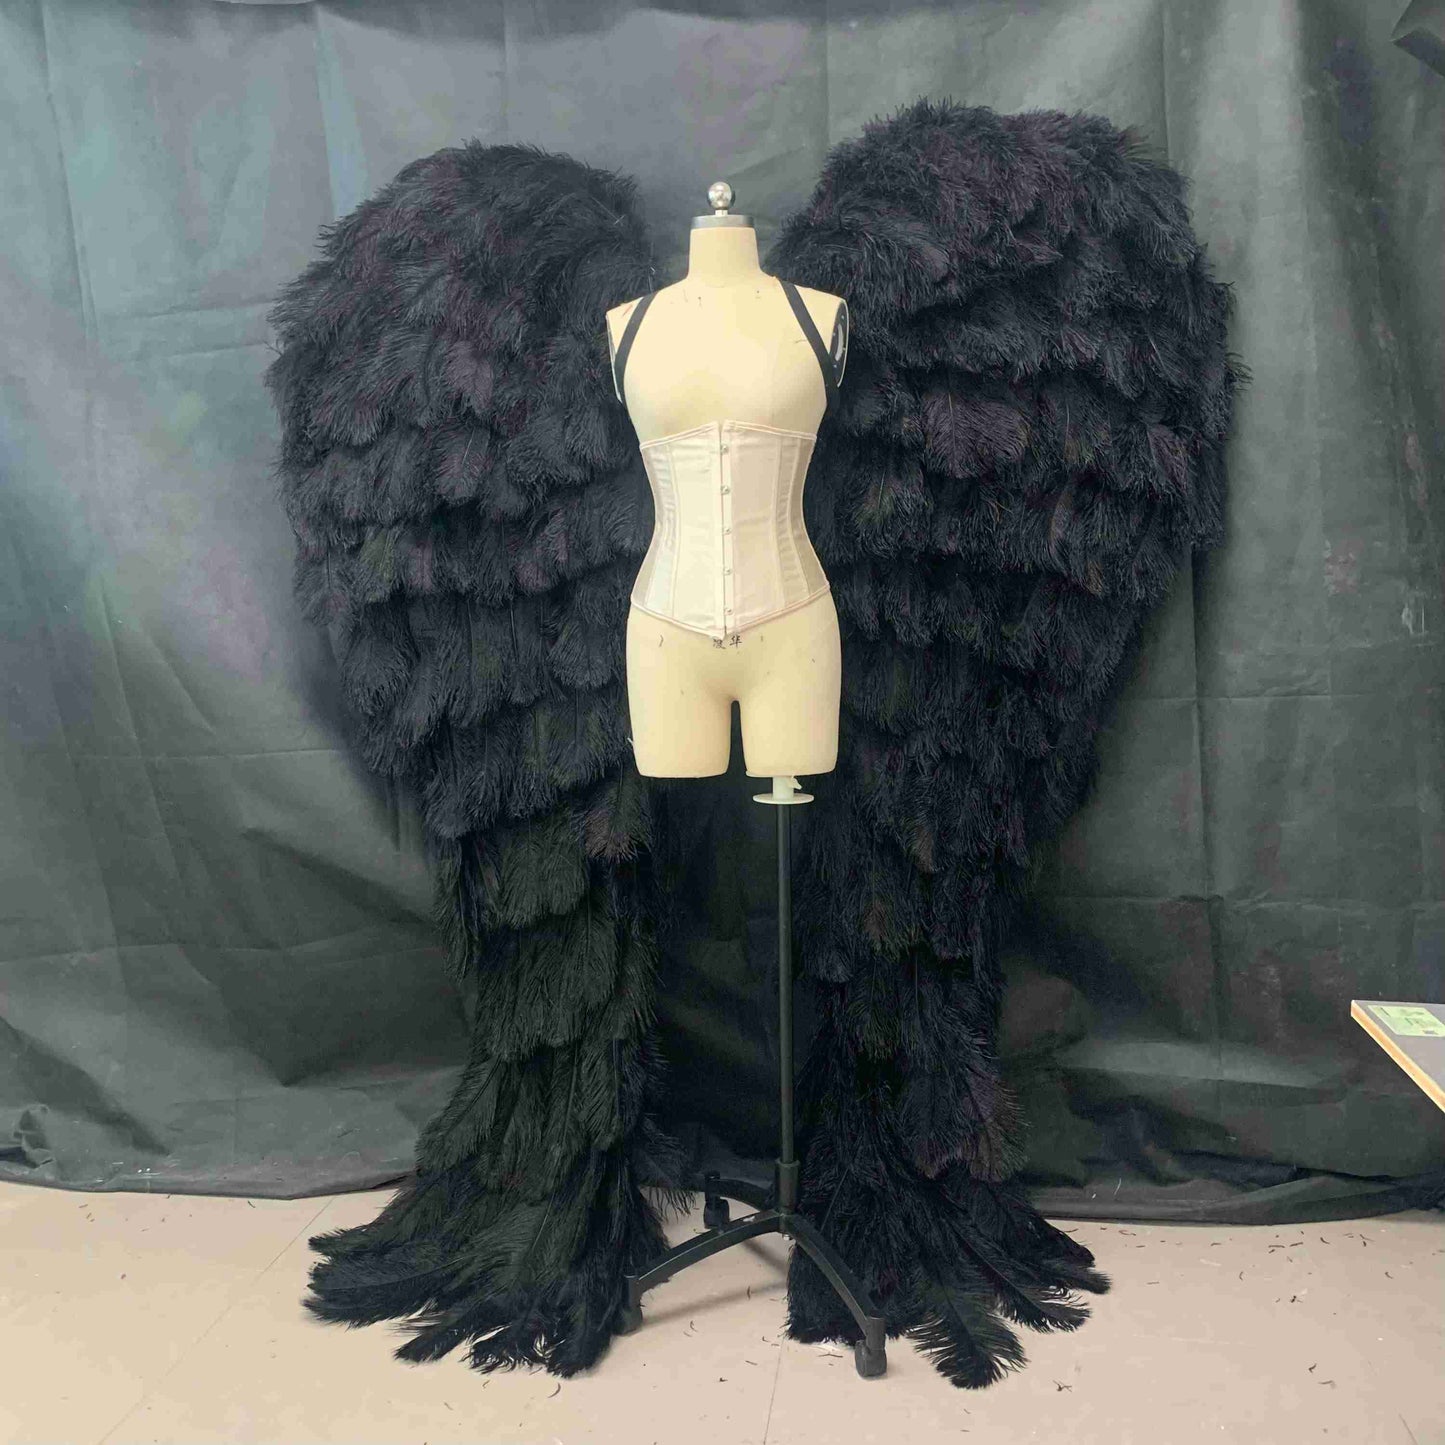 Our luxury black angel wings from the front. Made from ostrich feathers. Wings for angel costume. Suitable for photoshoots especially for boudoirs.